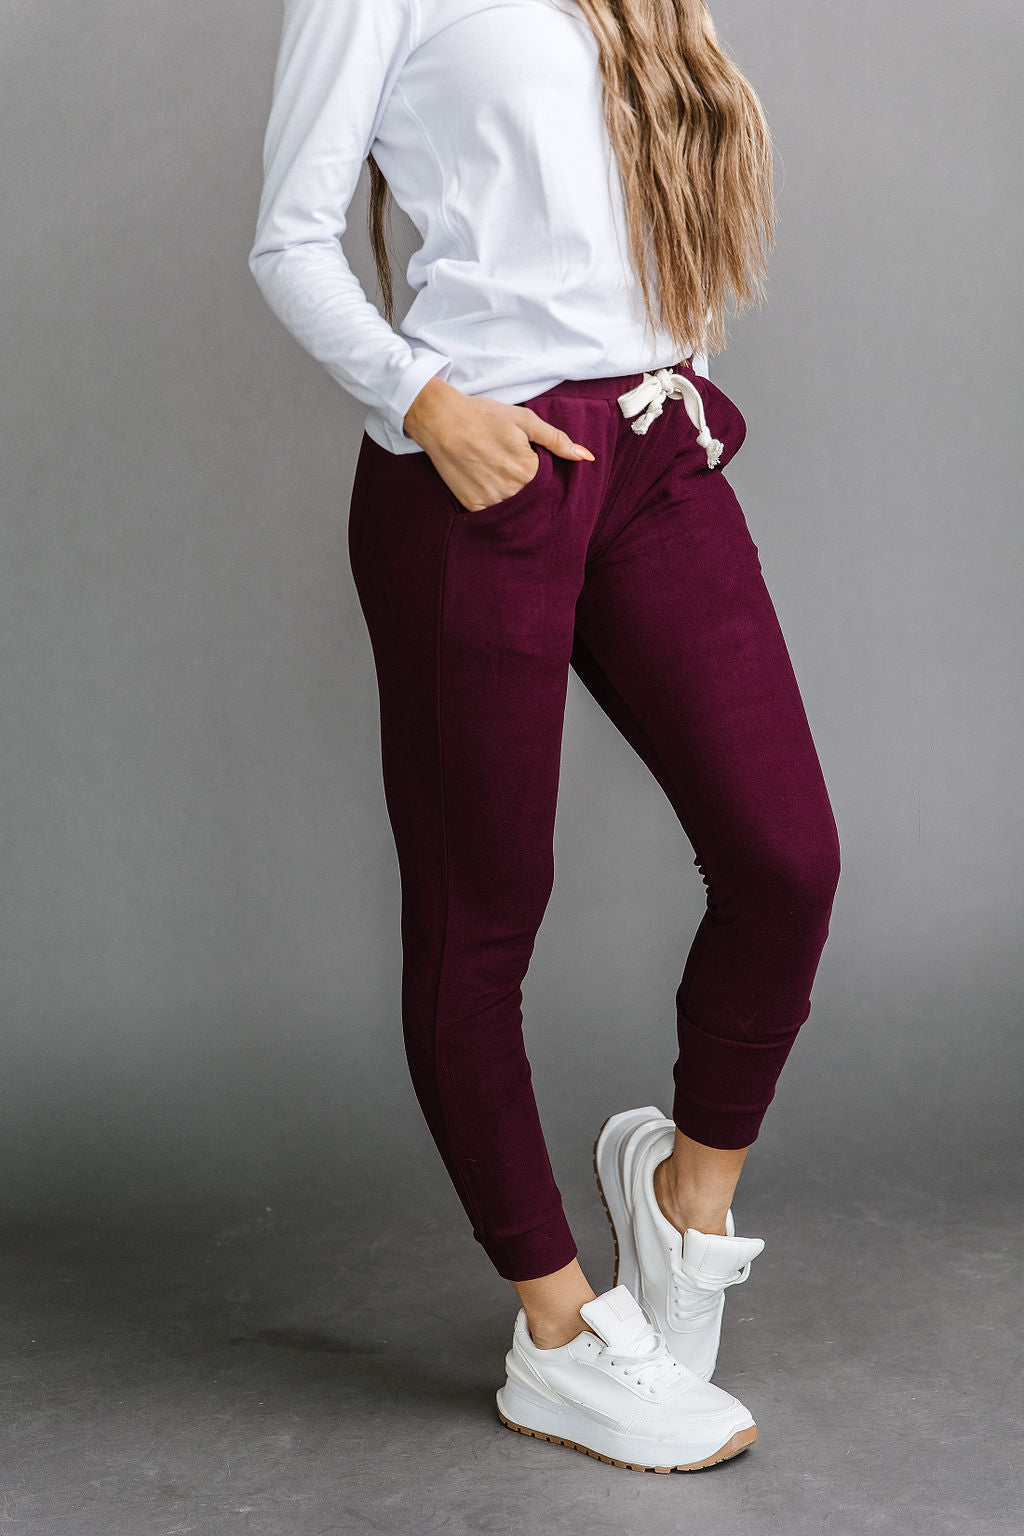 *Outlet* Performance Fleece Joggers (Red Wine) FINAL SALE